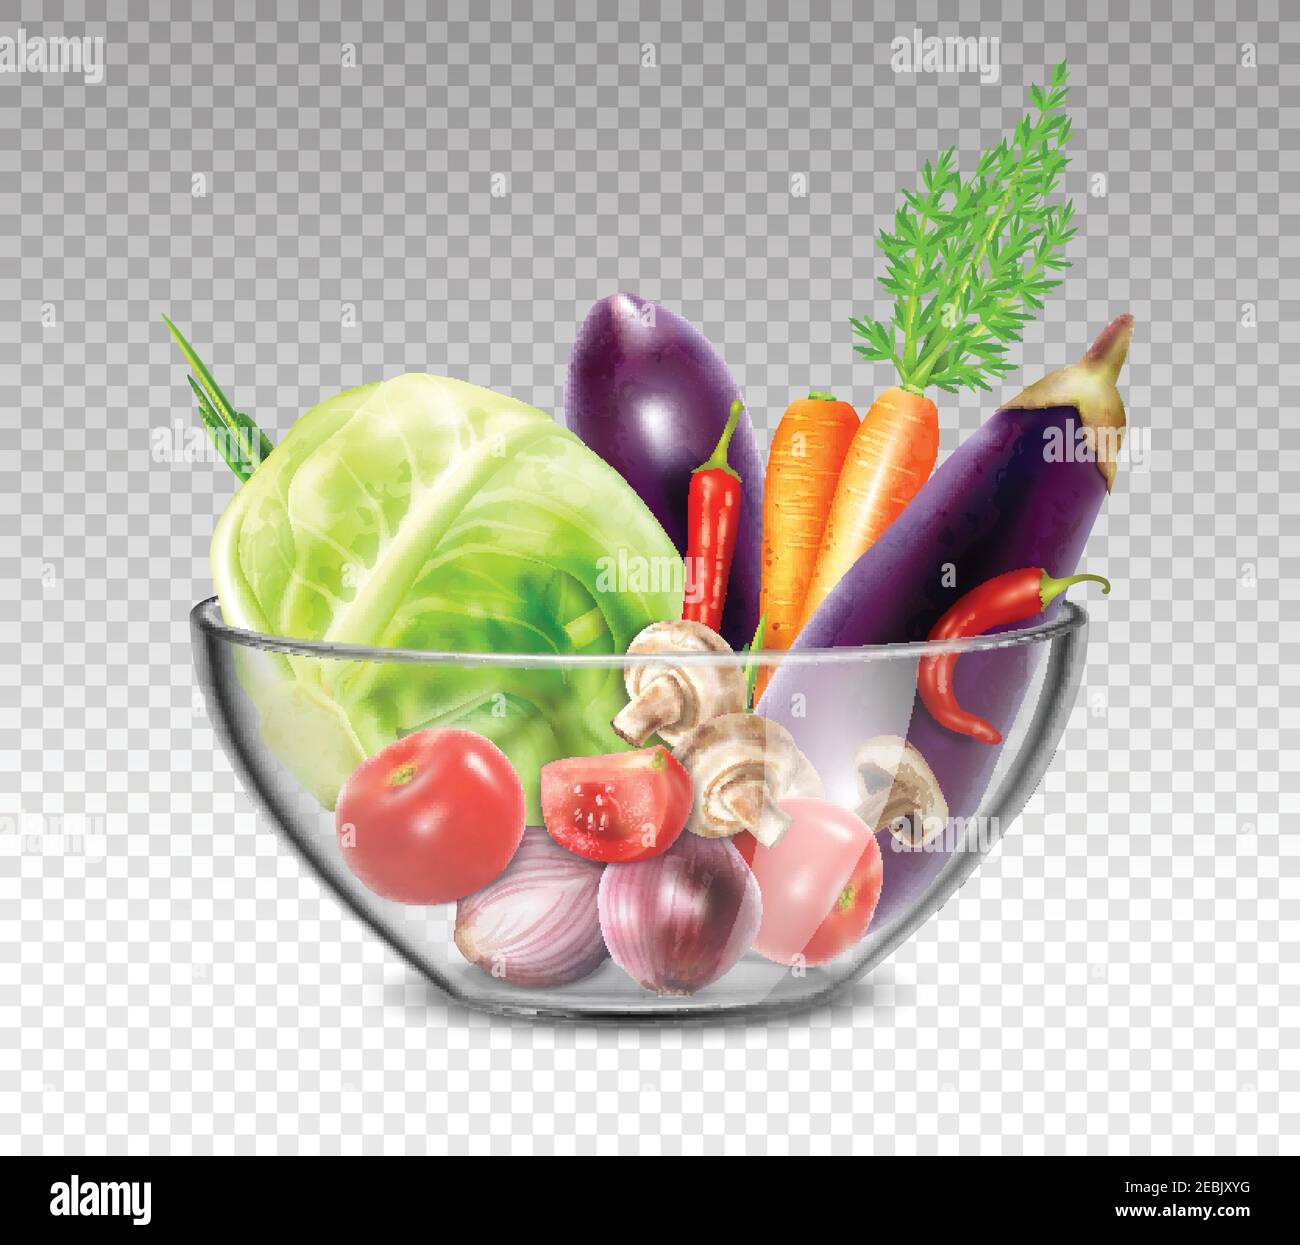 Colorful still life painting with vegetables in glass bowl on transparent background in realistic style vector illustration Stock Vector